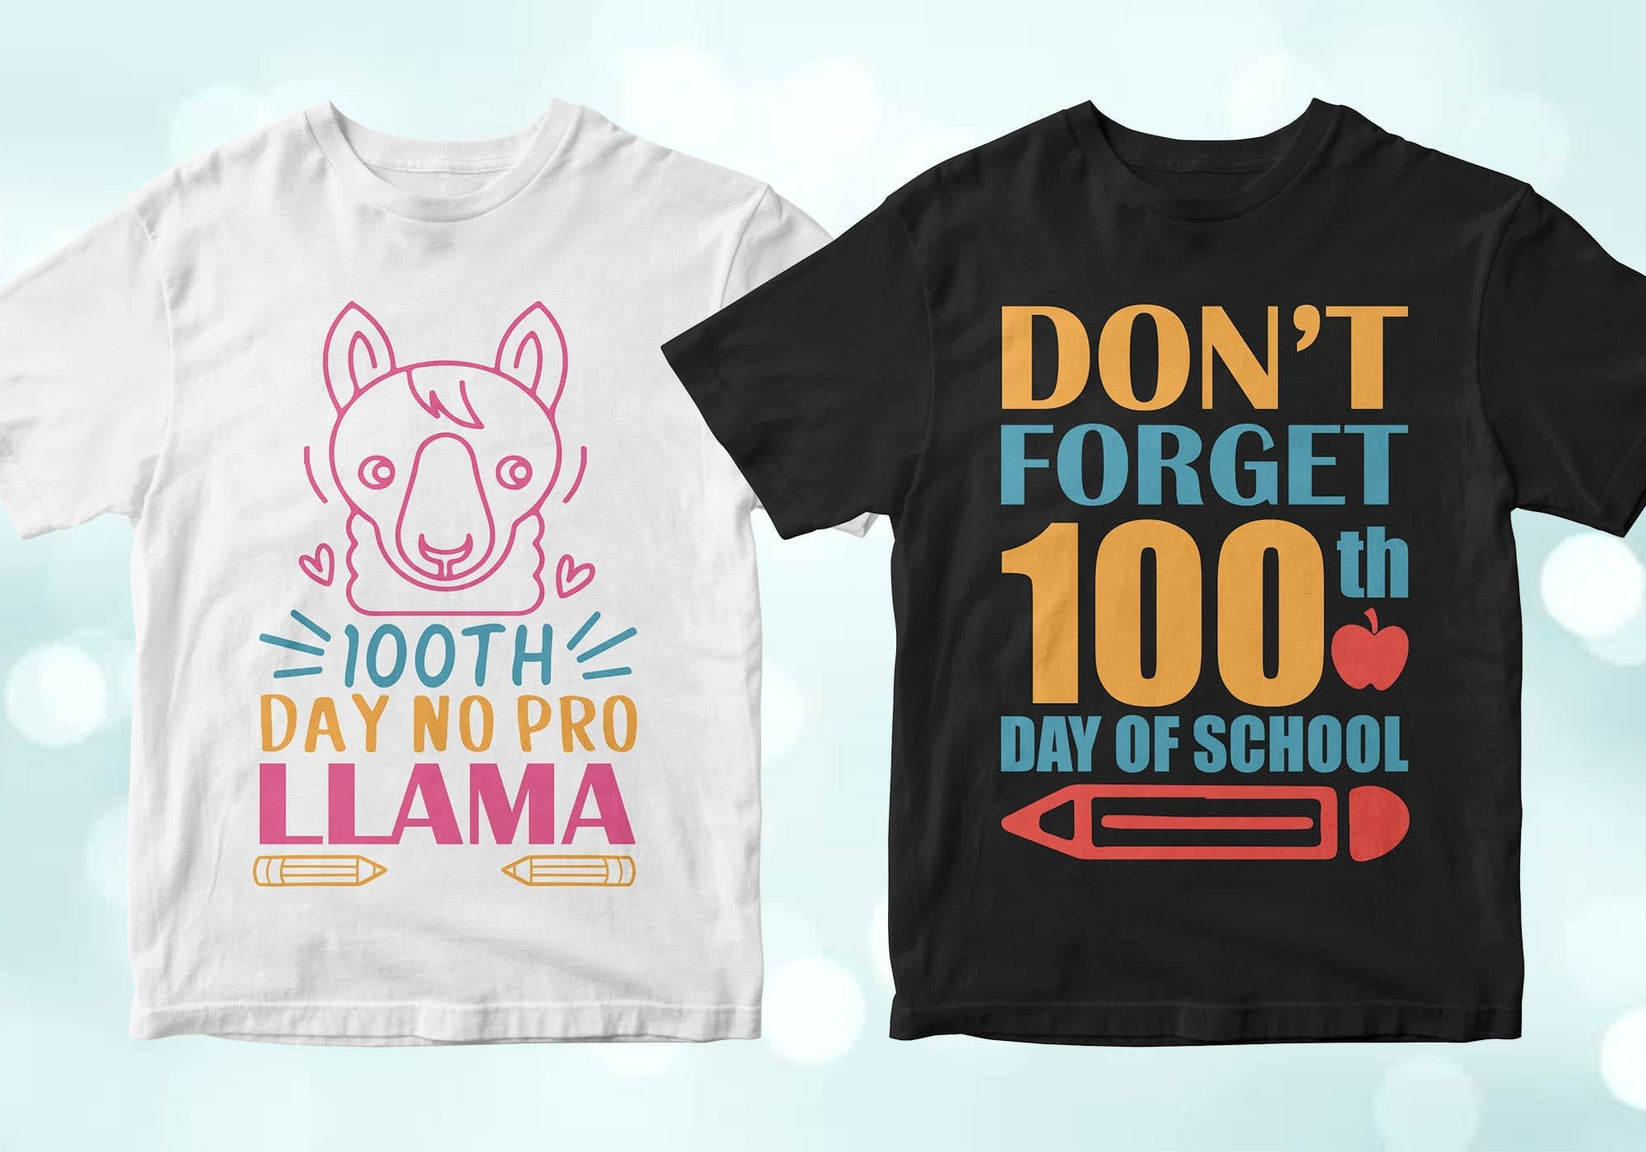 100th day no prob-llama, don't forget 100th day of school